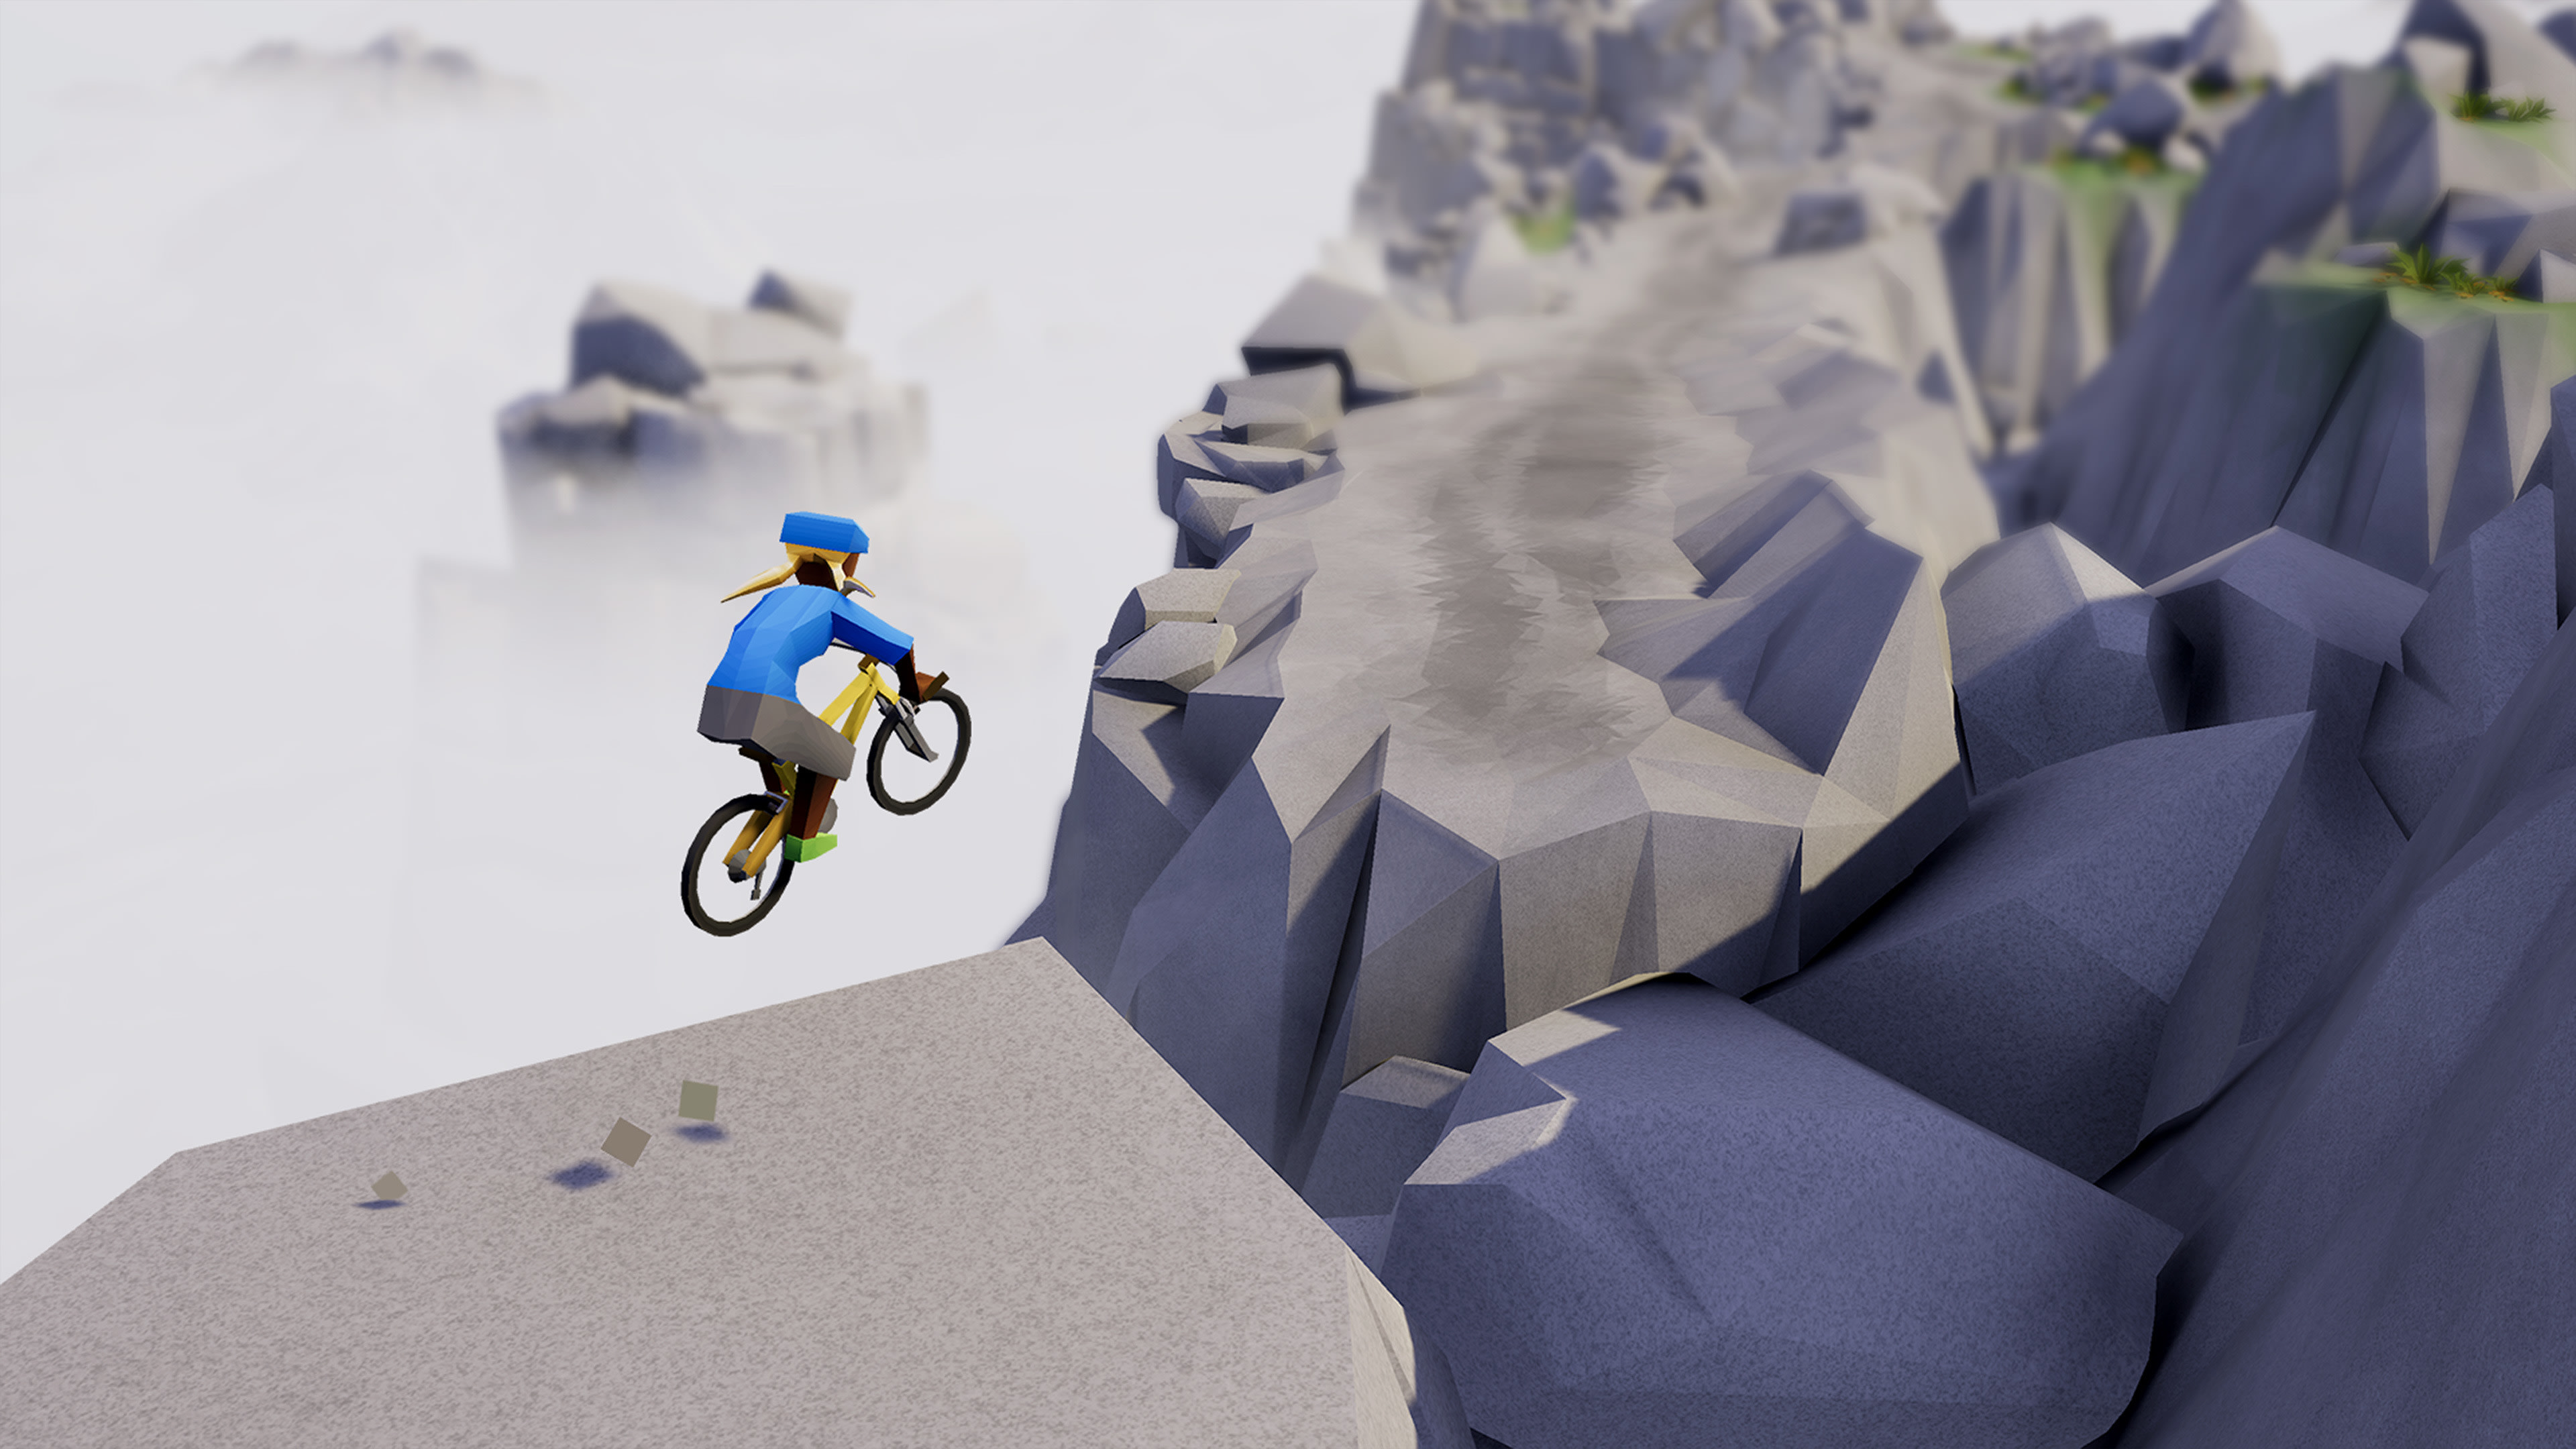 Video Game Lonely Mountains: Downhill 4k Ultra HD Wallpaper